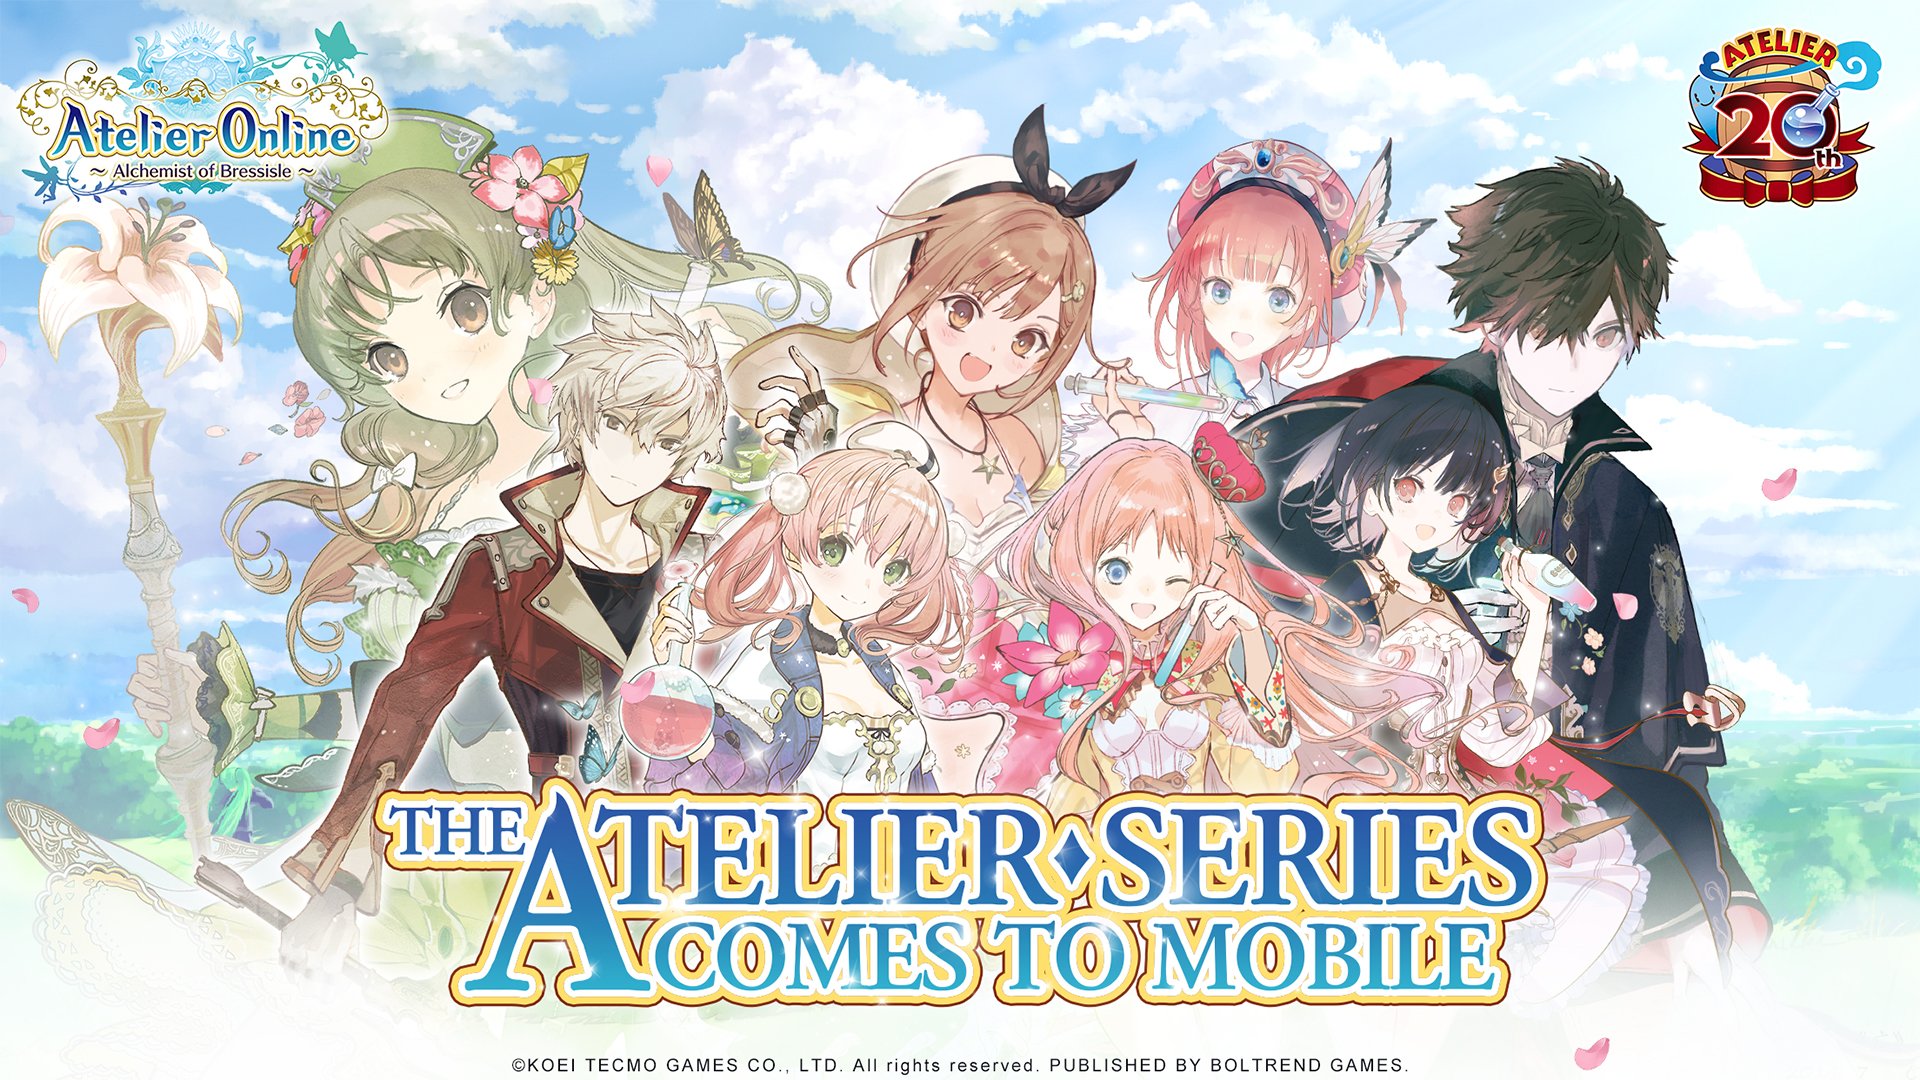 ‘Atelier On-line: Alchemist of Bressisle’ Now Accessible on iOS and Android